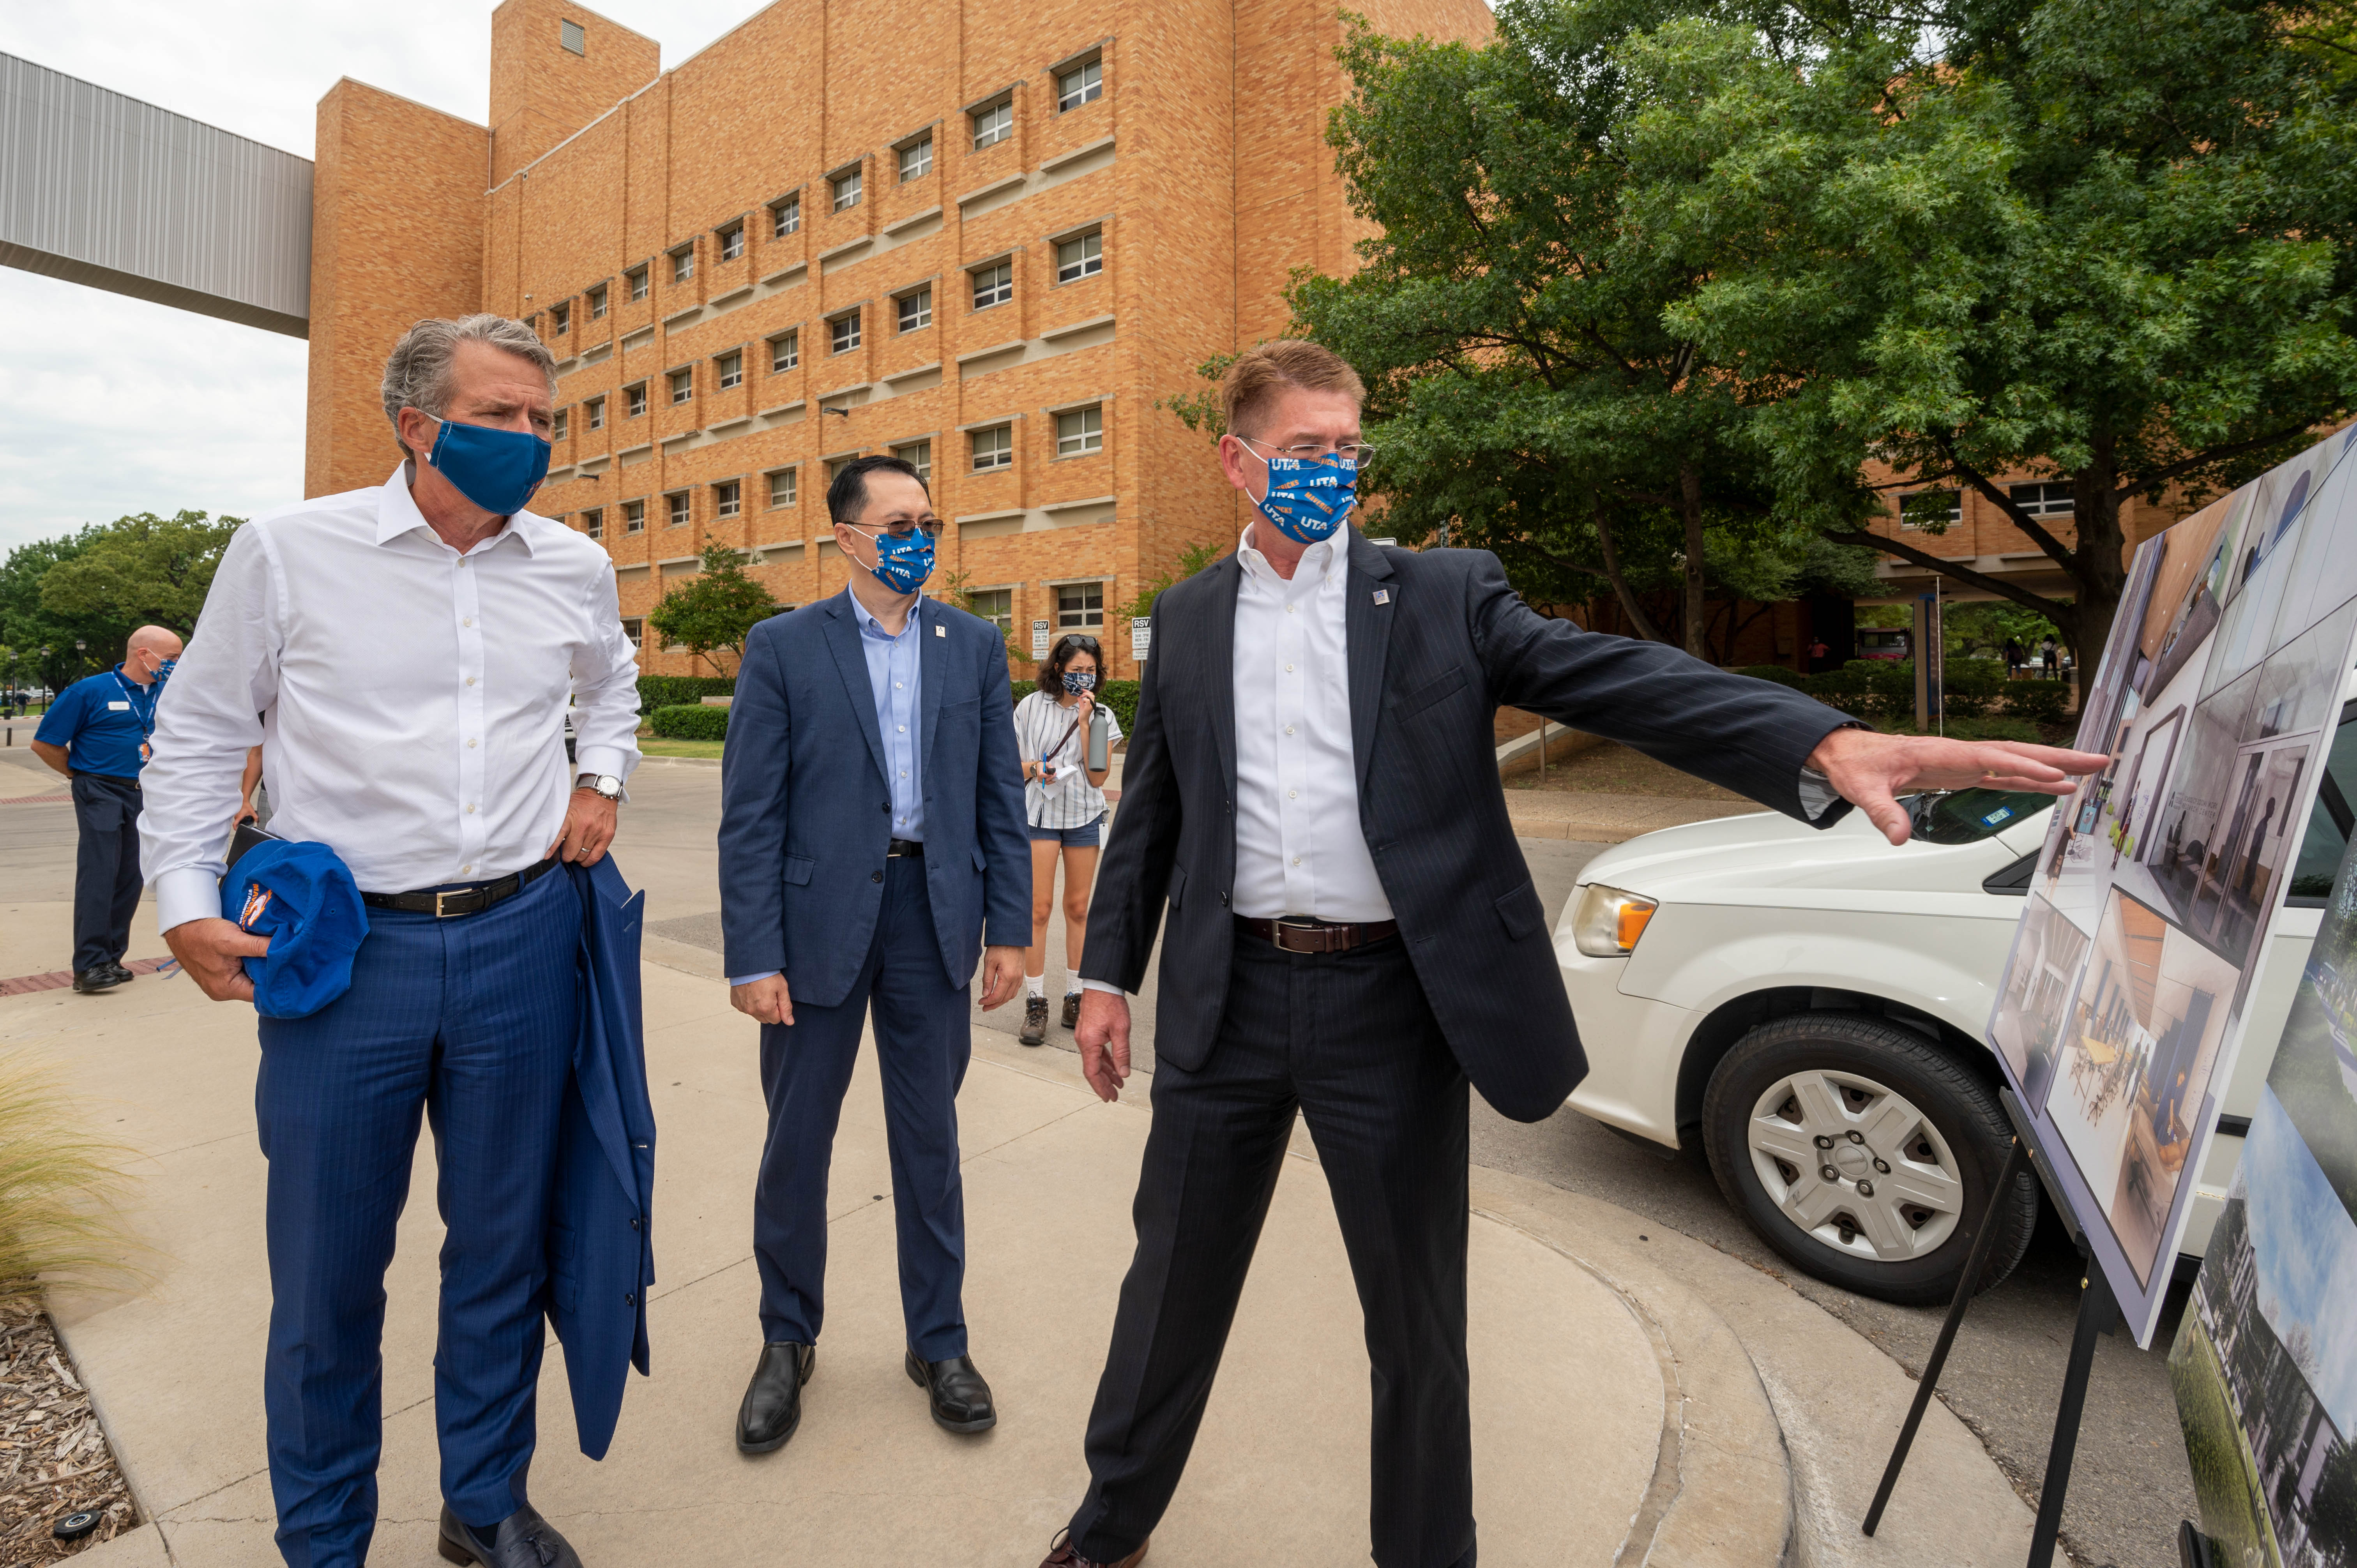 Chancellor James Milliken; UTA Interim President Teik Lim; and Vice President for Administration and Campus Operations John Hall" _languageinserted="true